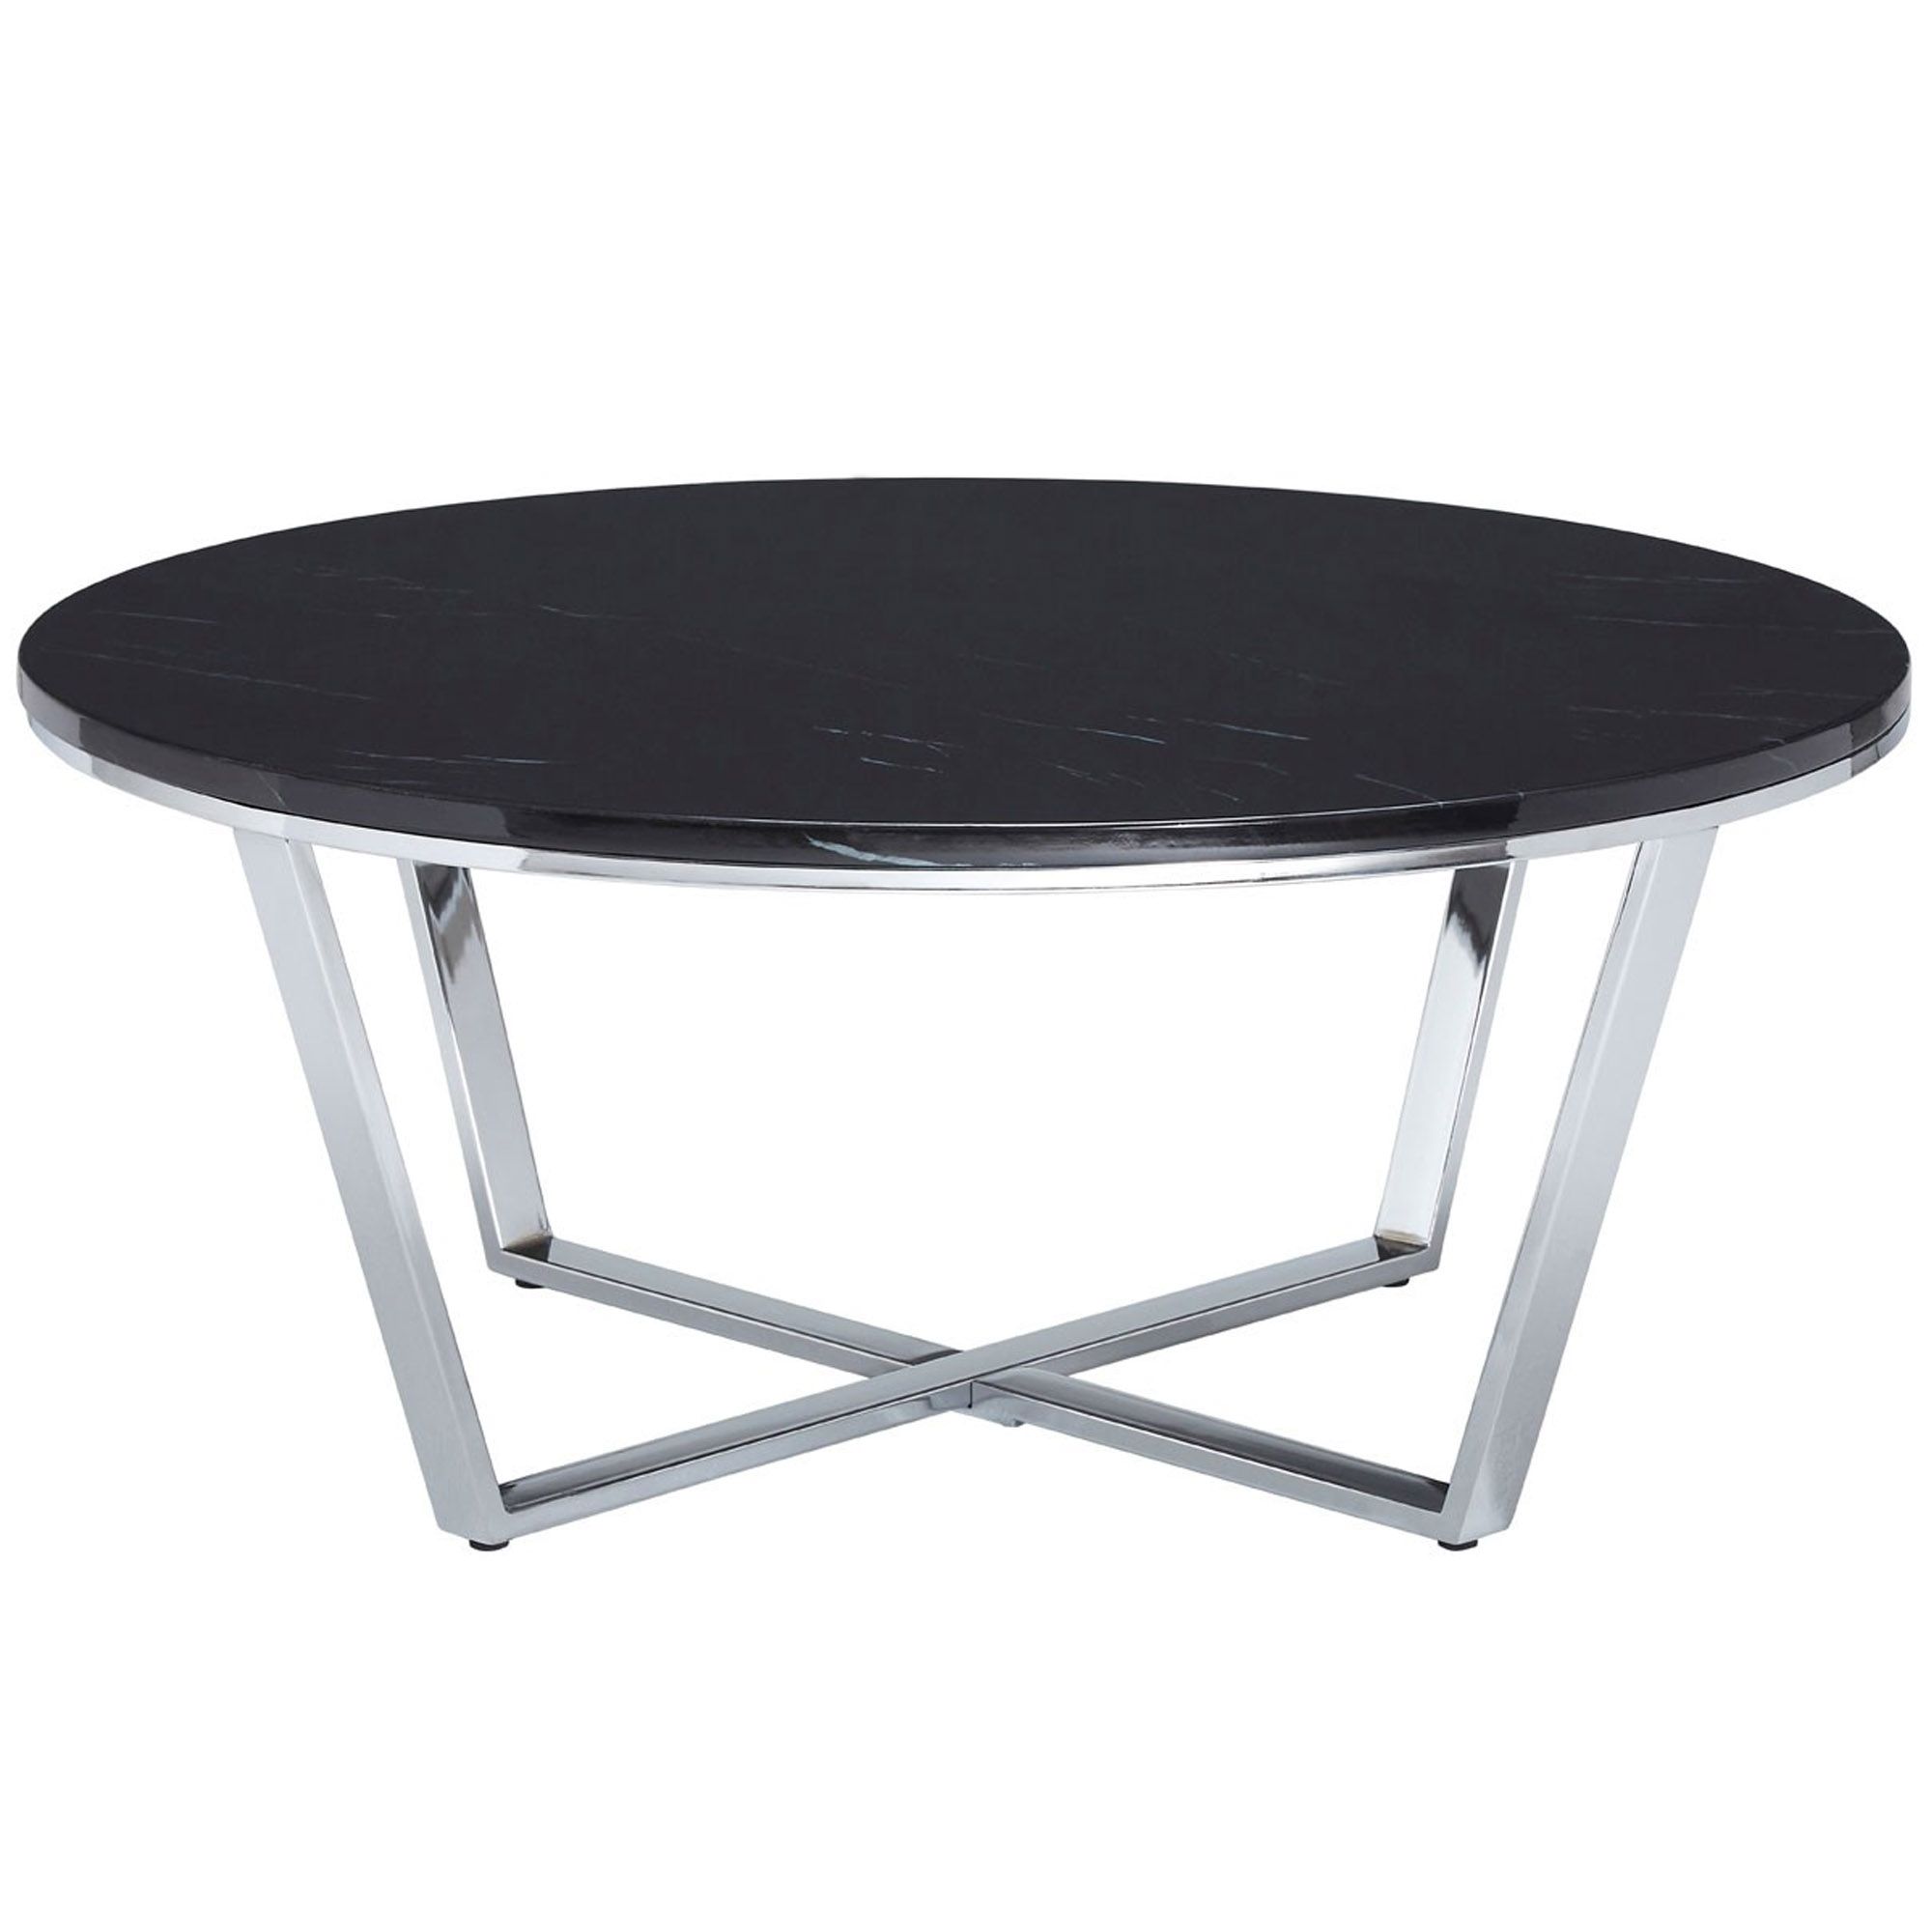 Black Allure Round Coffee Table | Modern & Contemporary Furniture Pertaining To Full Black Round Coffee Tables (View 15 of 20)